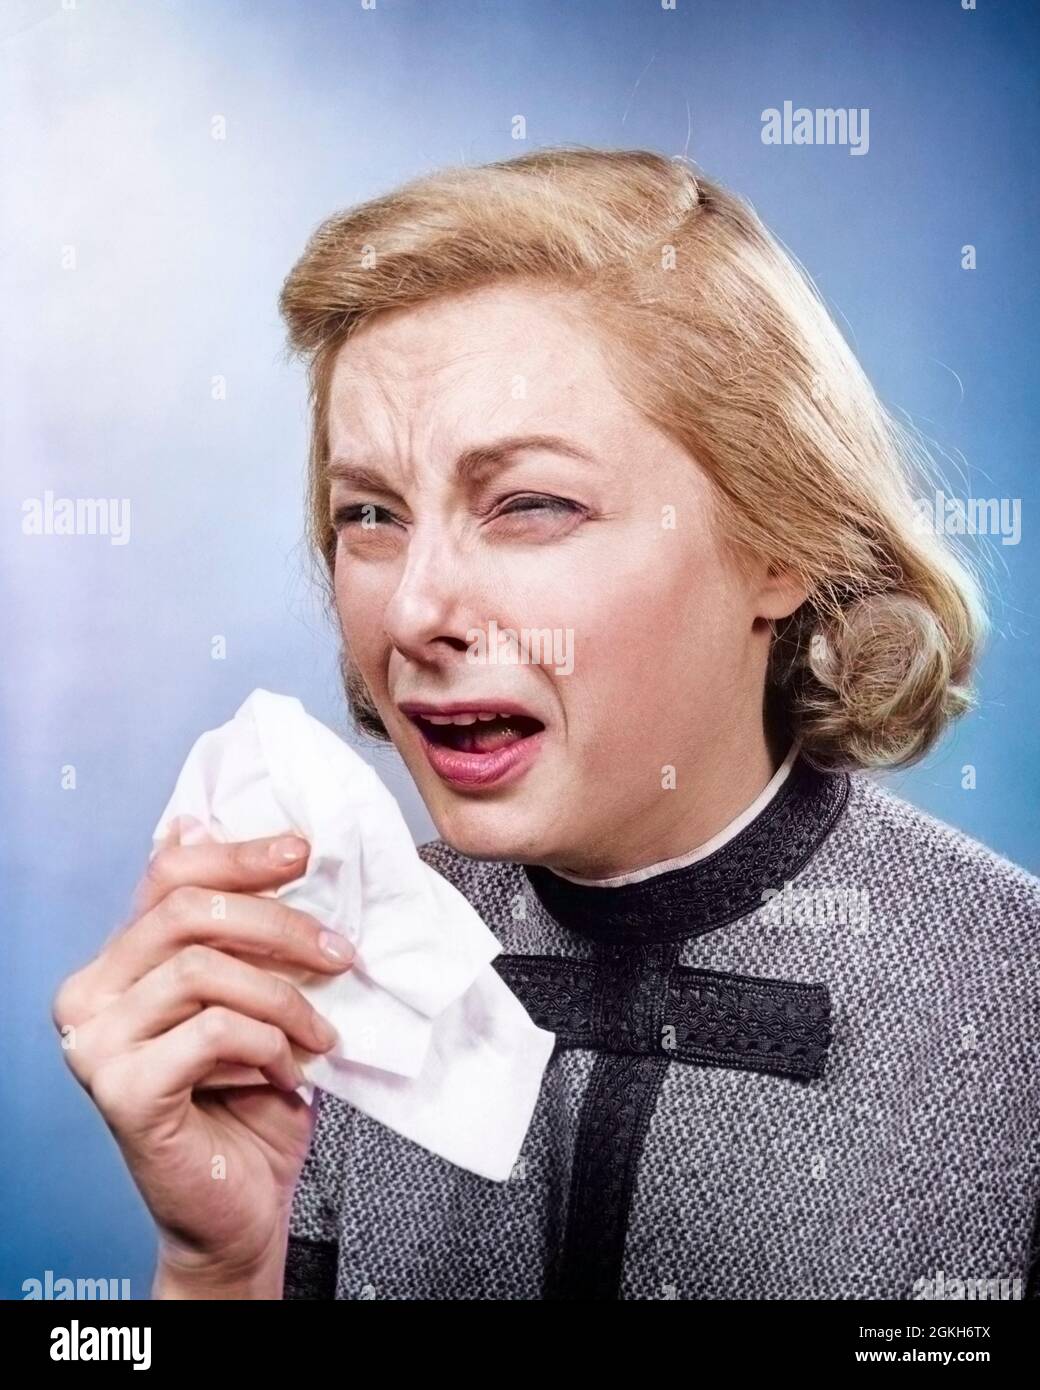 1950s WOMAN WITH HANDKERCHIEF SNEEZING INDOOR - a1594c HAR001 HARS AILMENT B&W SADNESS SICKNESS MINOR HEALTHCARE SUFFERING WELLNESS HEAD AND SHOULDERS HANDKERCHIEF ILLS HURTFUL HEALTH CARE SUFFER SUFFERER ILLNESSES HURT HURTING MEDICAL PROBLEMS INFECTIONS MINOR ILLNESS ACHING PAINED PROBLEMS MEDICAL PROBLEM POOR HEALTH AILING AILMENTS INFECTION MID-ADULT MID-ADULT MAN PAINS ACHE BLACK AND WHITE CAUCASIAN ETHNICITY HAR001 OLD FASHIONED Stock Photo